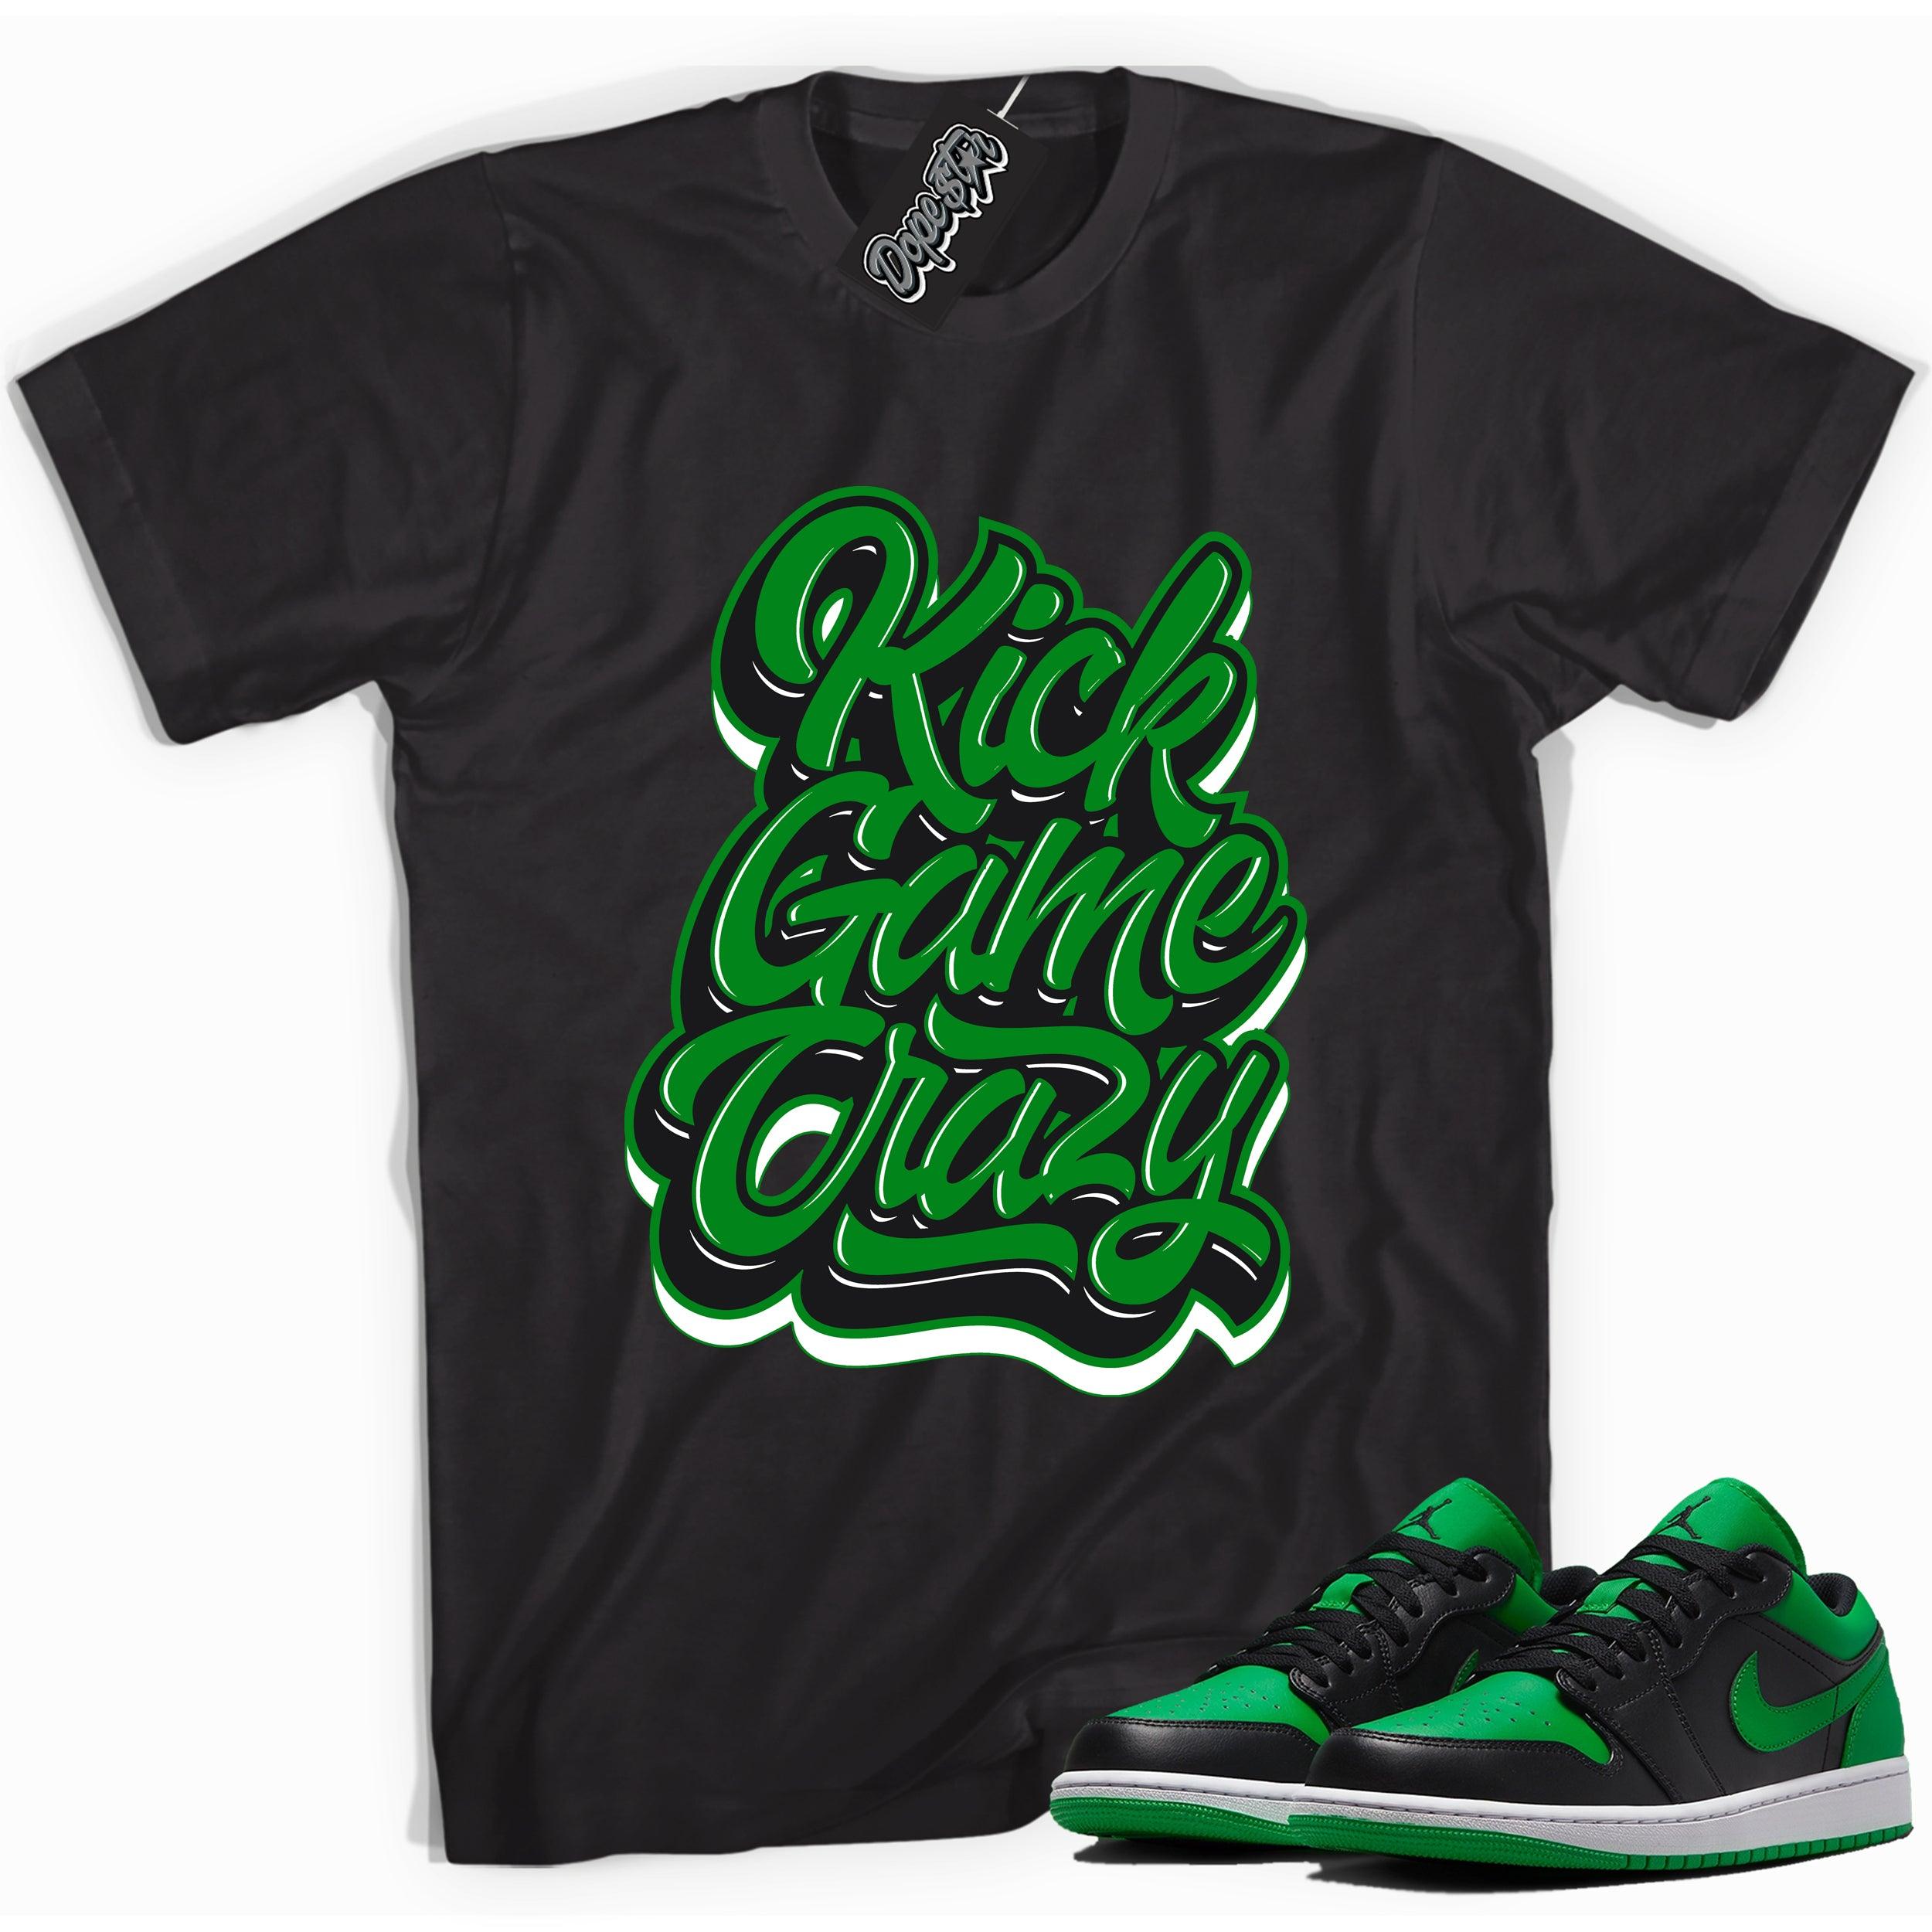 Cool black graphic tee with 'Kick Game Crazy' print, that perfectly matches Air Jordan 1 Low Lucky Green sneakers